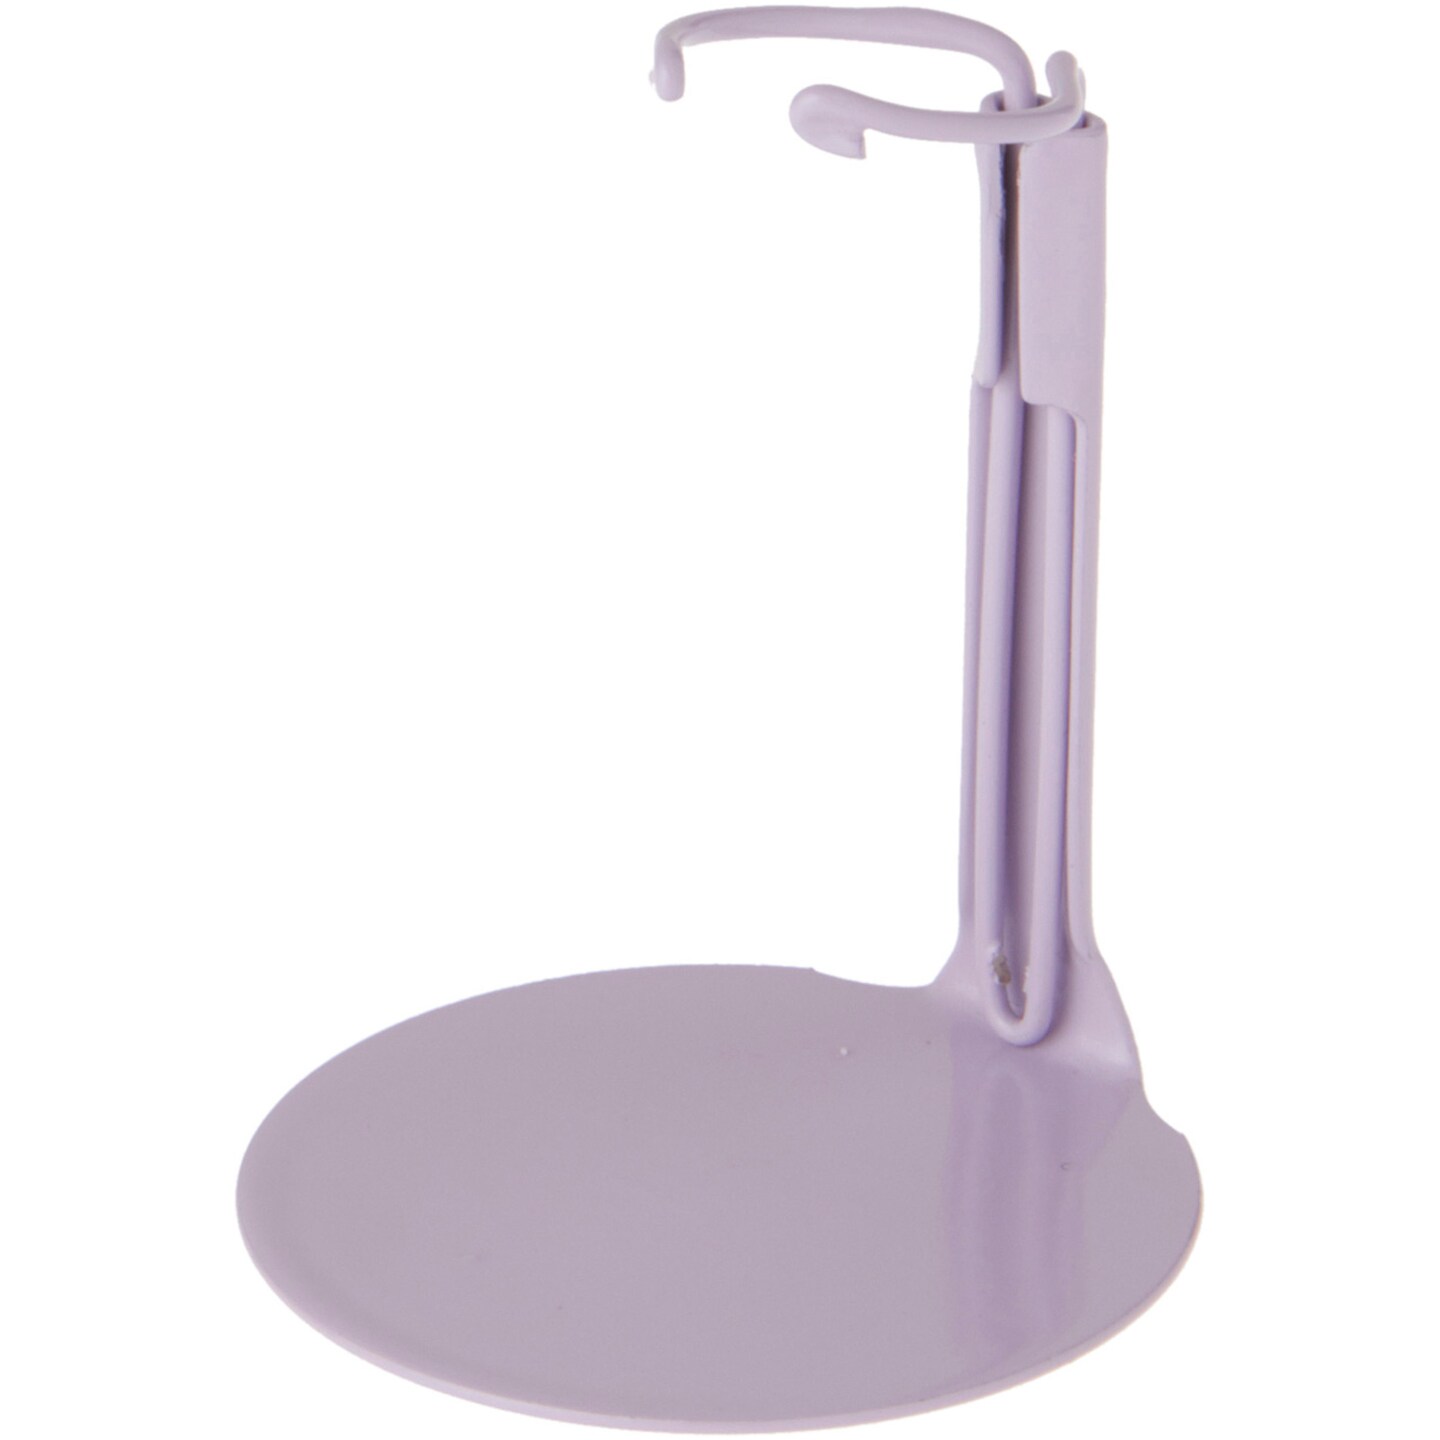 Kaiser 1090 Purple Adjustable Doll Stand, fits 3.5 to 5 inch Dolls or Action Figures, waist width adjusts from 0.625 to 0.75 inches